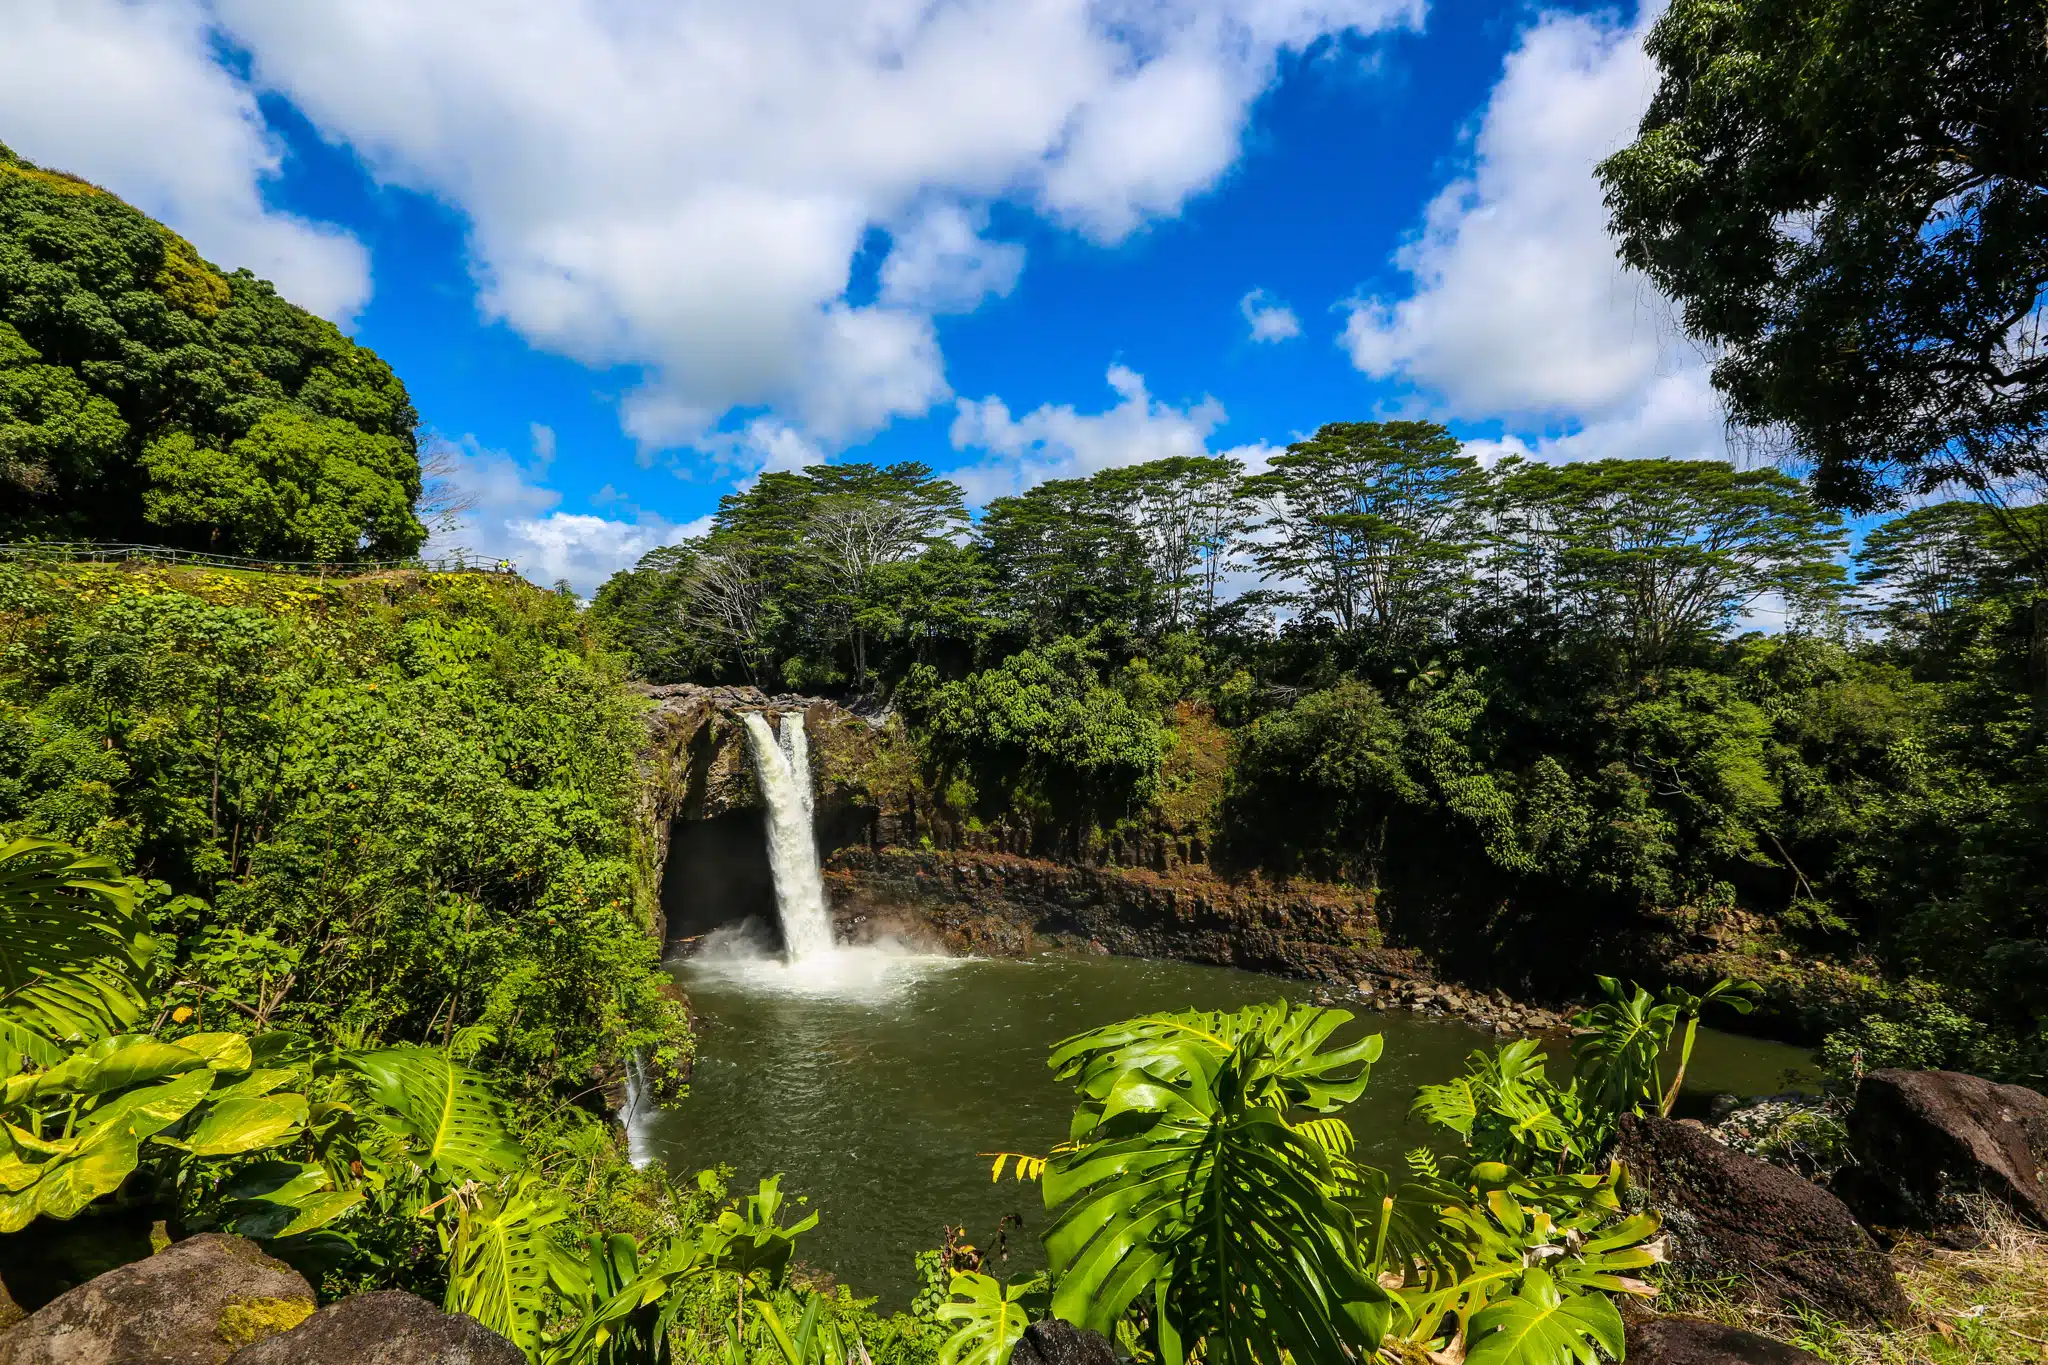 Wailuku River State Park is a State Park located in the city of Hilo on Big Island, Hawaii